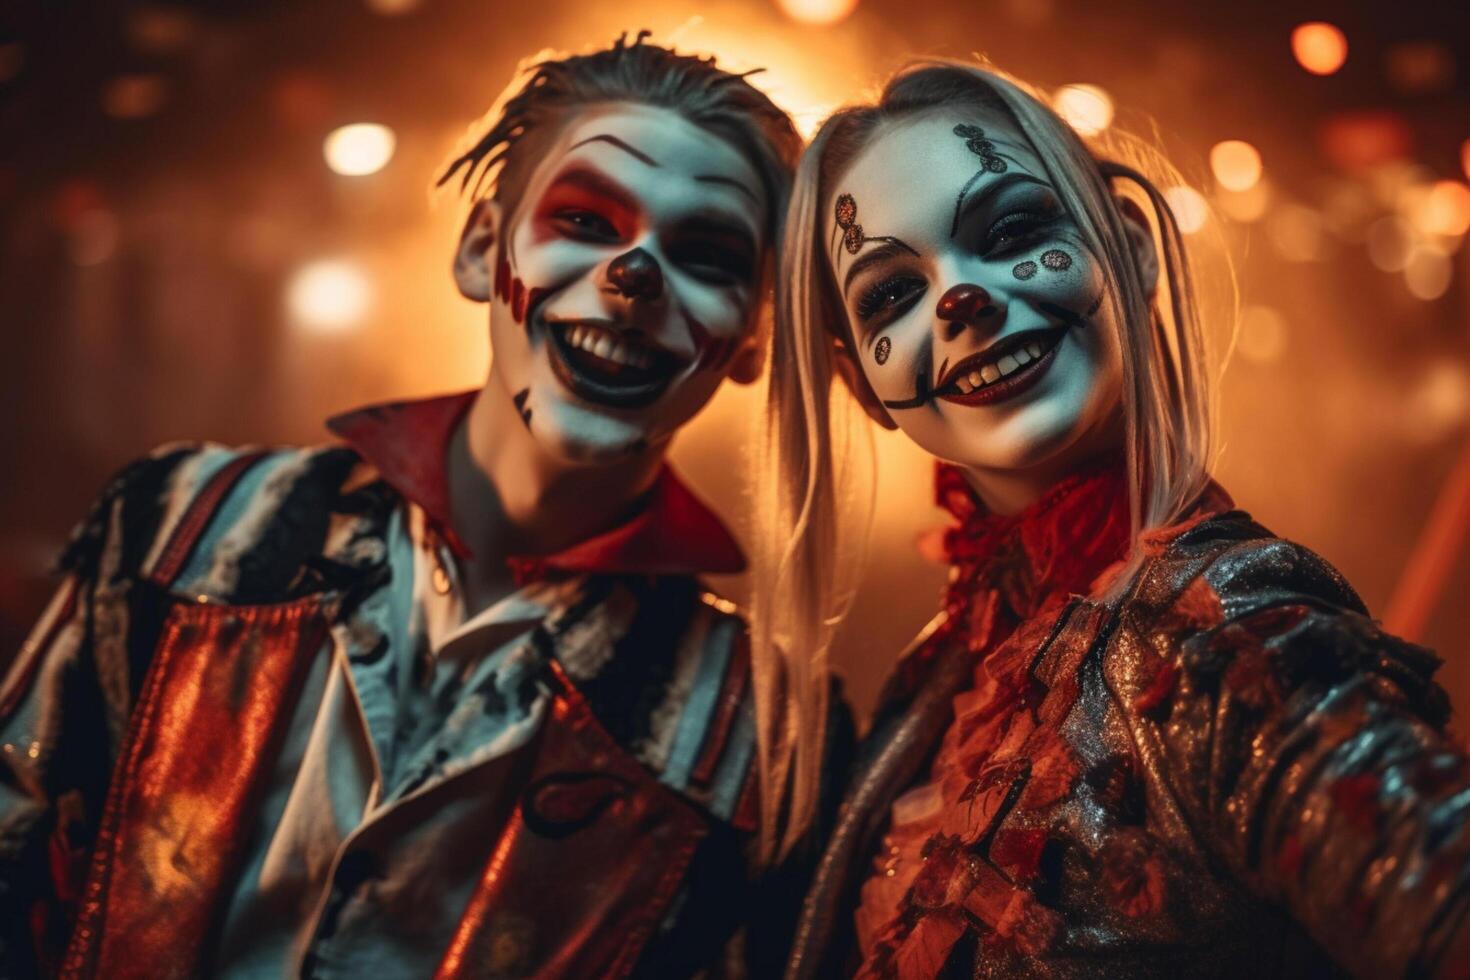 Teenagers friends in costumes celebrating and having fun at halloween party. Young people at costumes party halloween celebration concept by photo